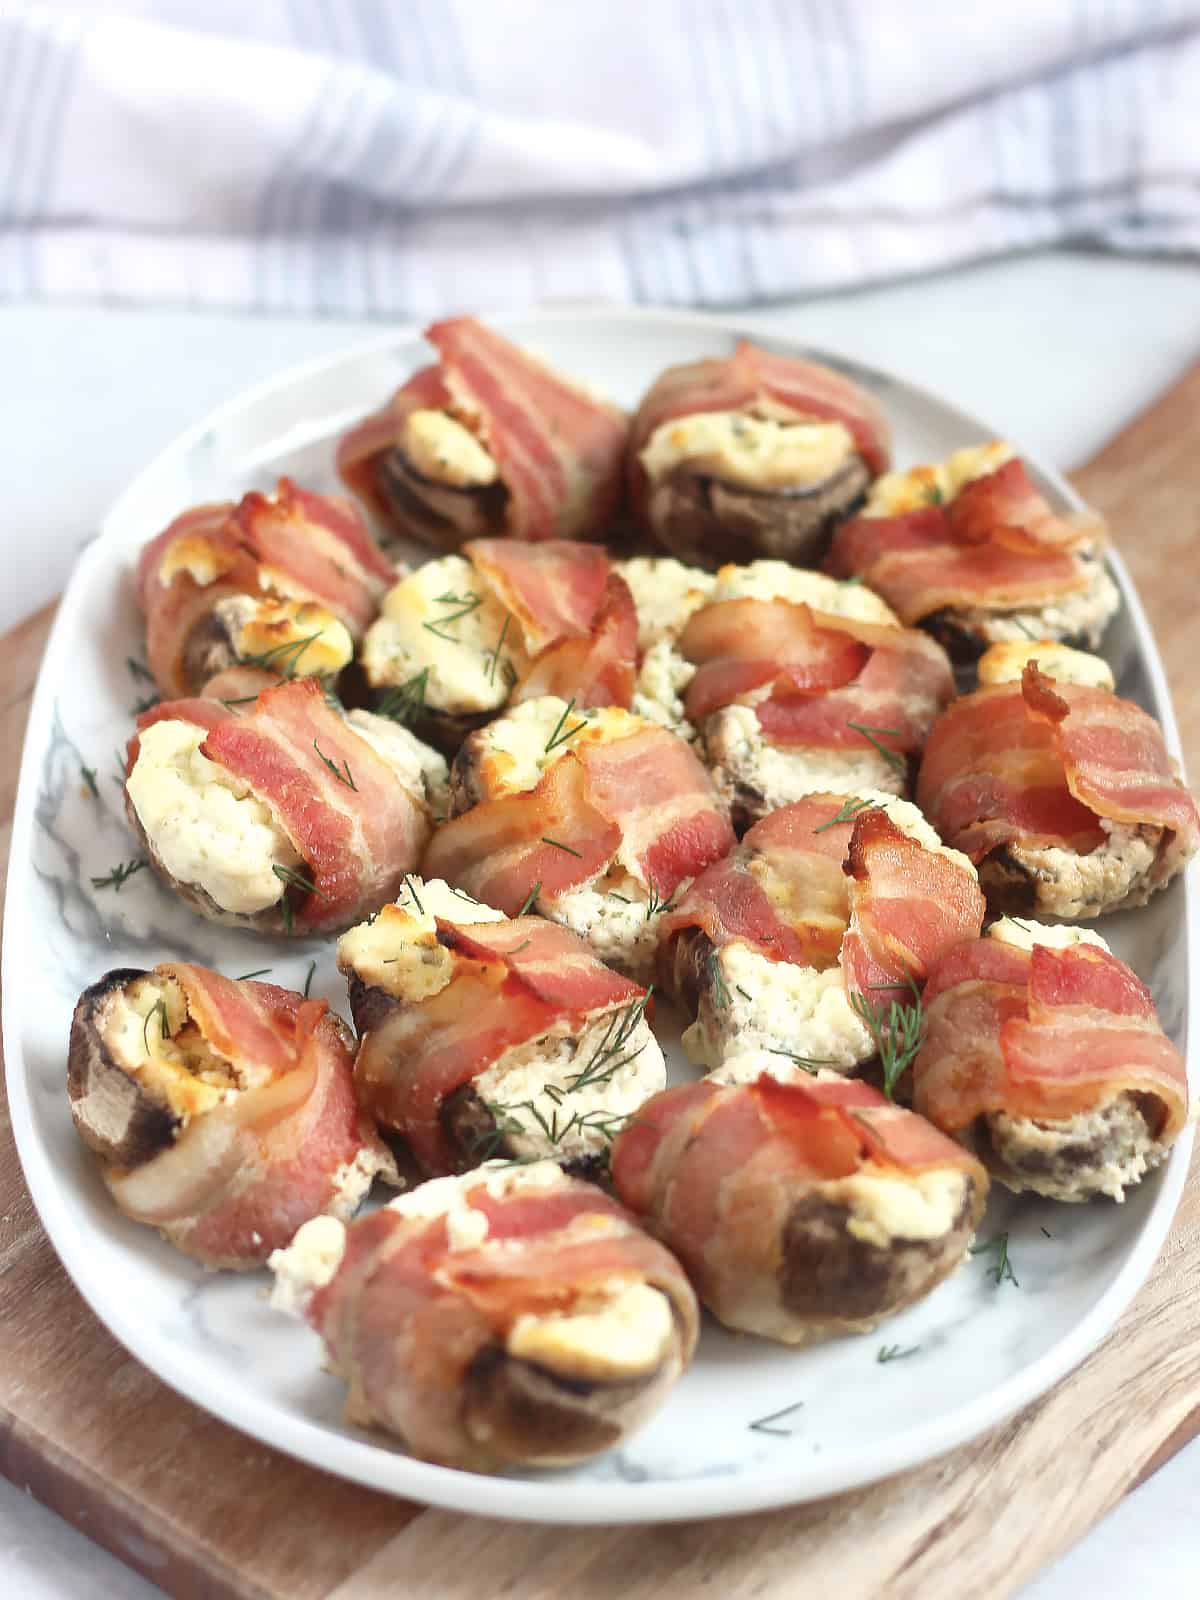 Boursin stuffed mushrooms wrapped with bacon on a serving plate.